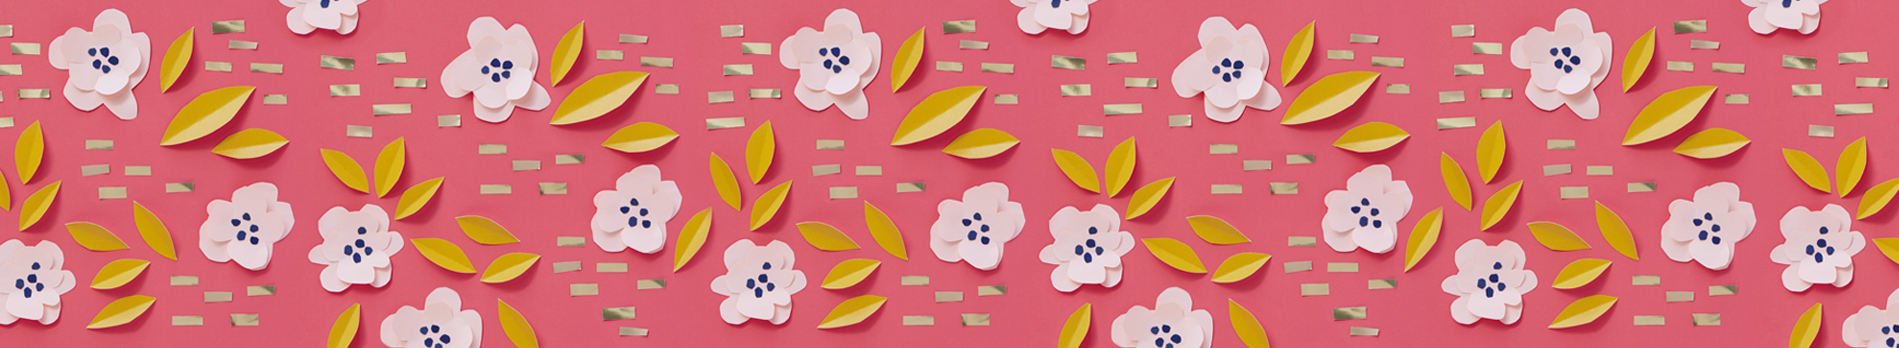 Spring background with paper cut flowers and leaves on a dark pink background